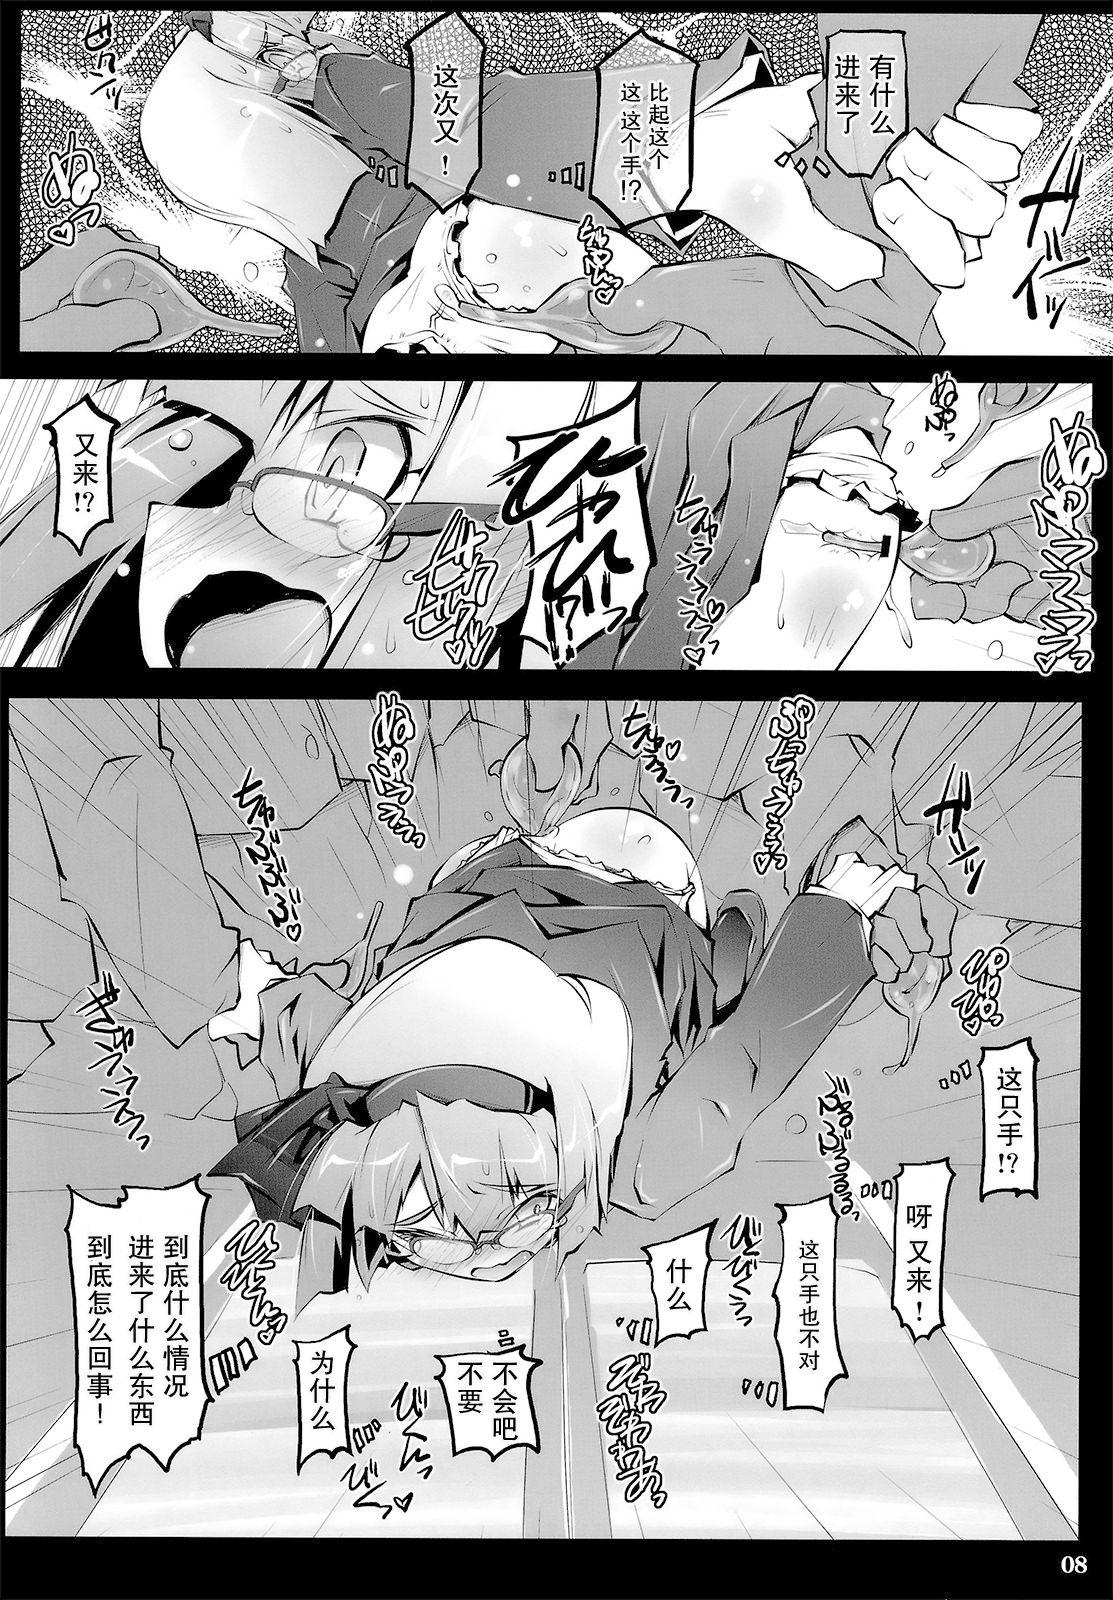 Old Vs Young PANIC TRAIN - Touhou project Famosa - Page 7